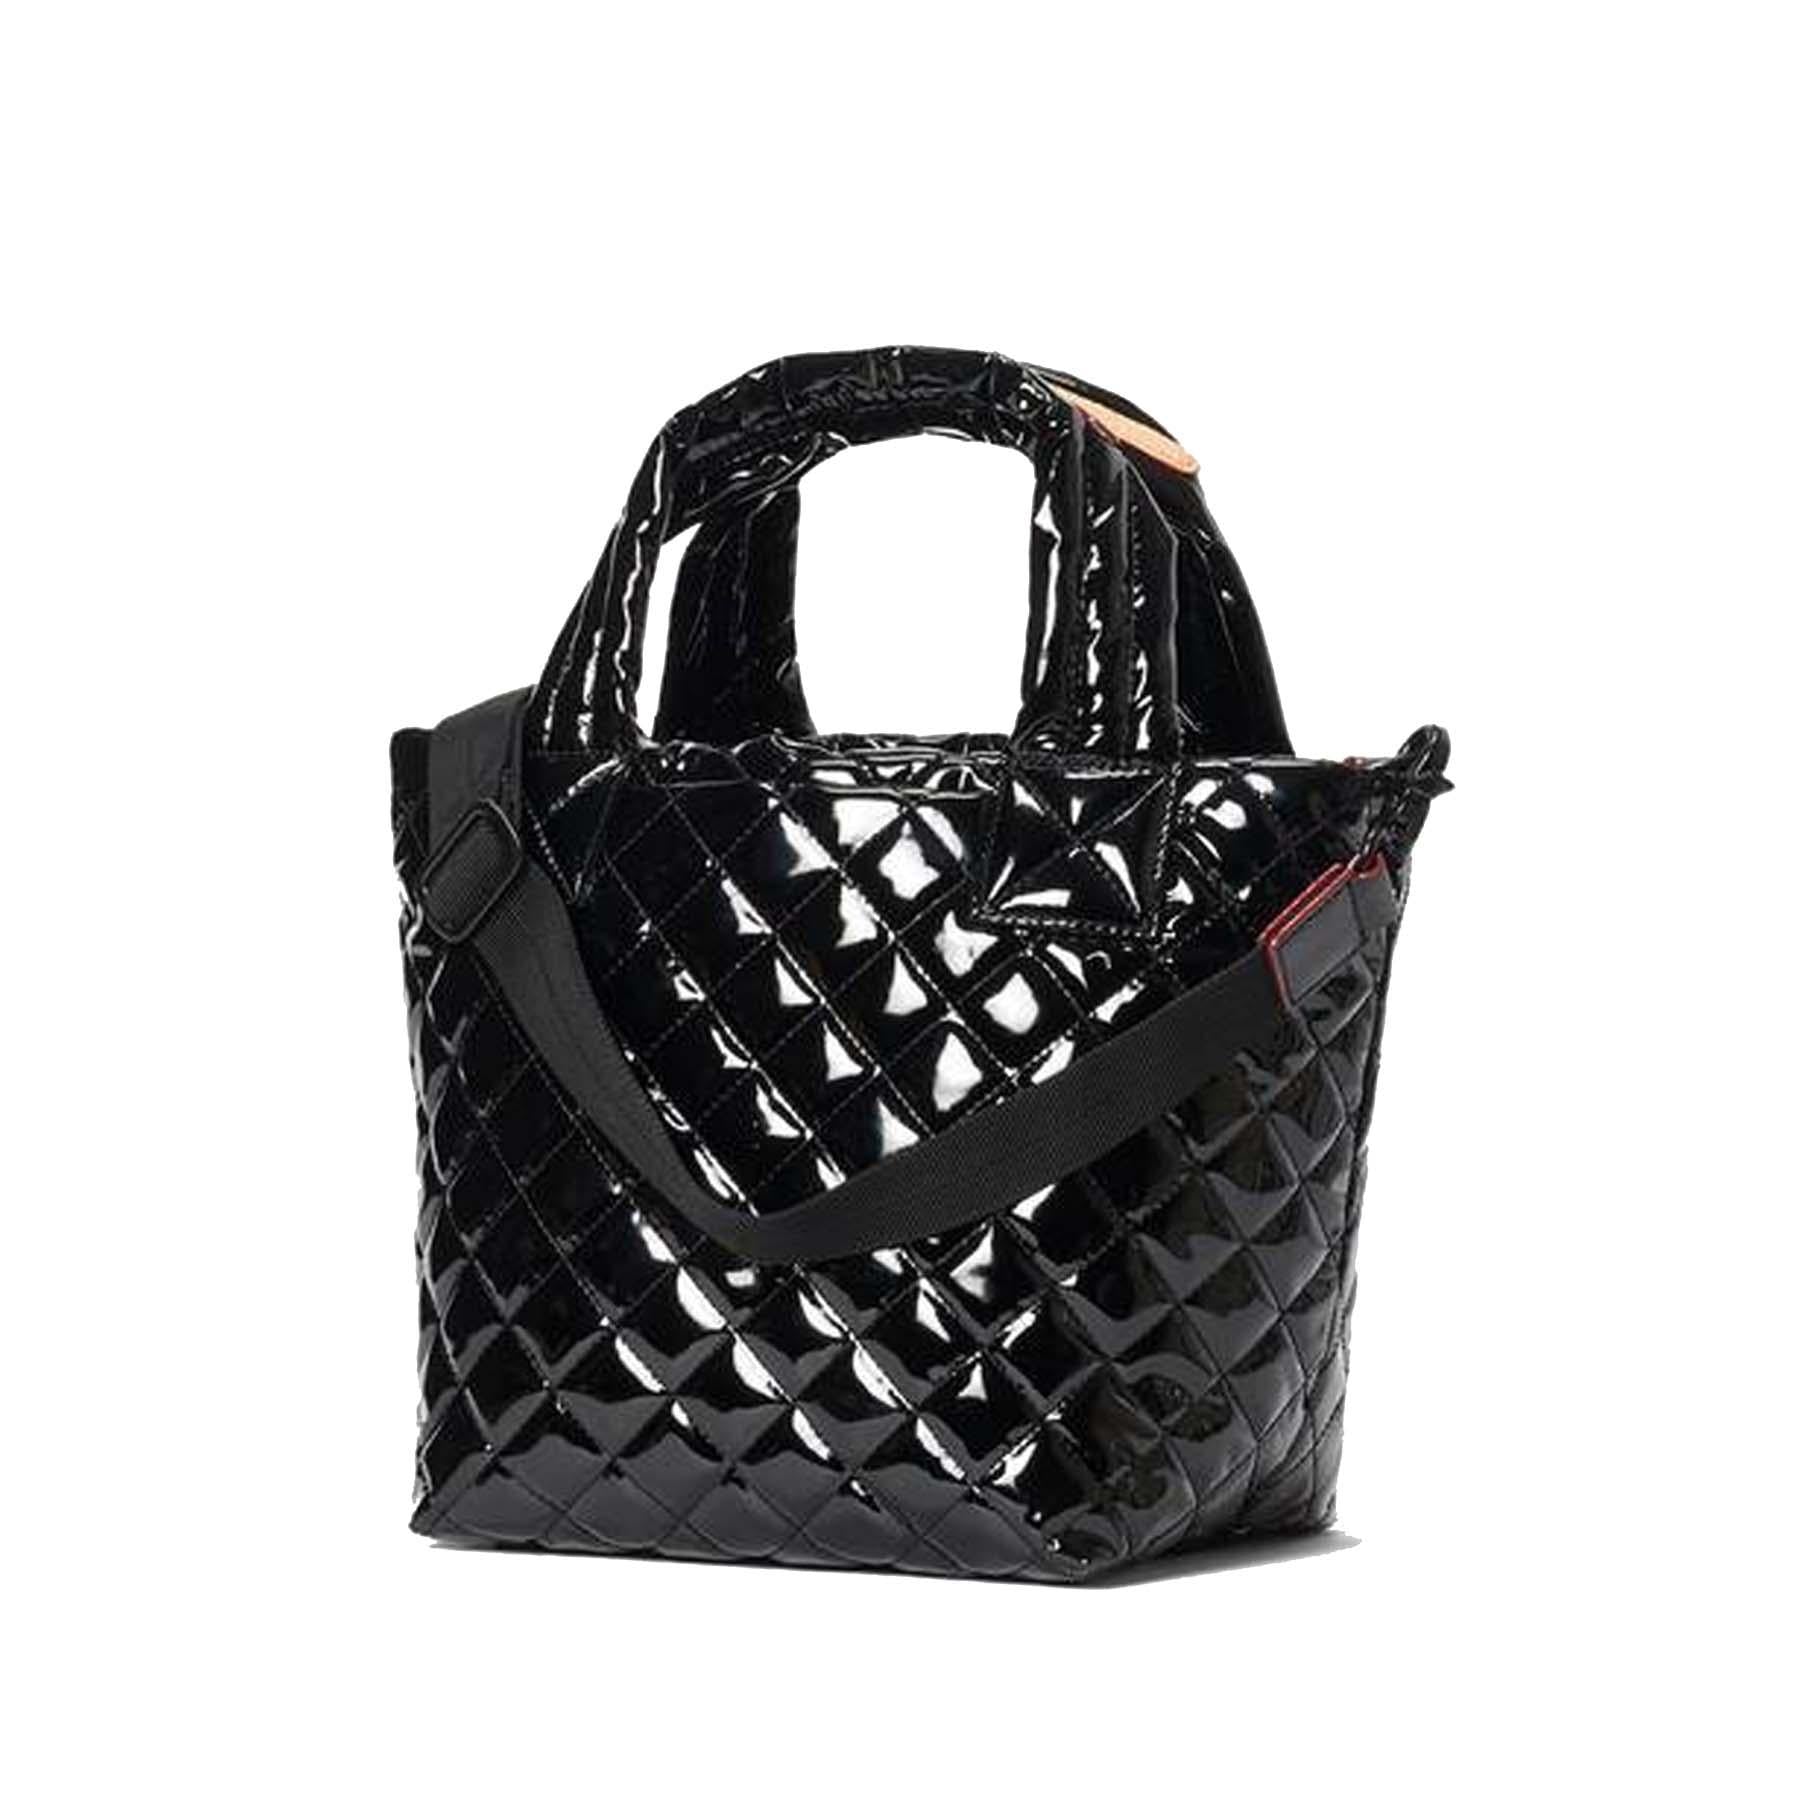 MZ Wallace Black Lacquer Large Metro Tote Deluxe